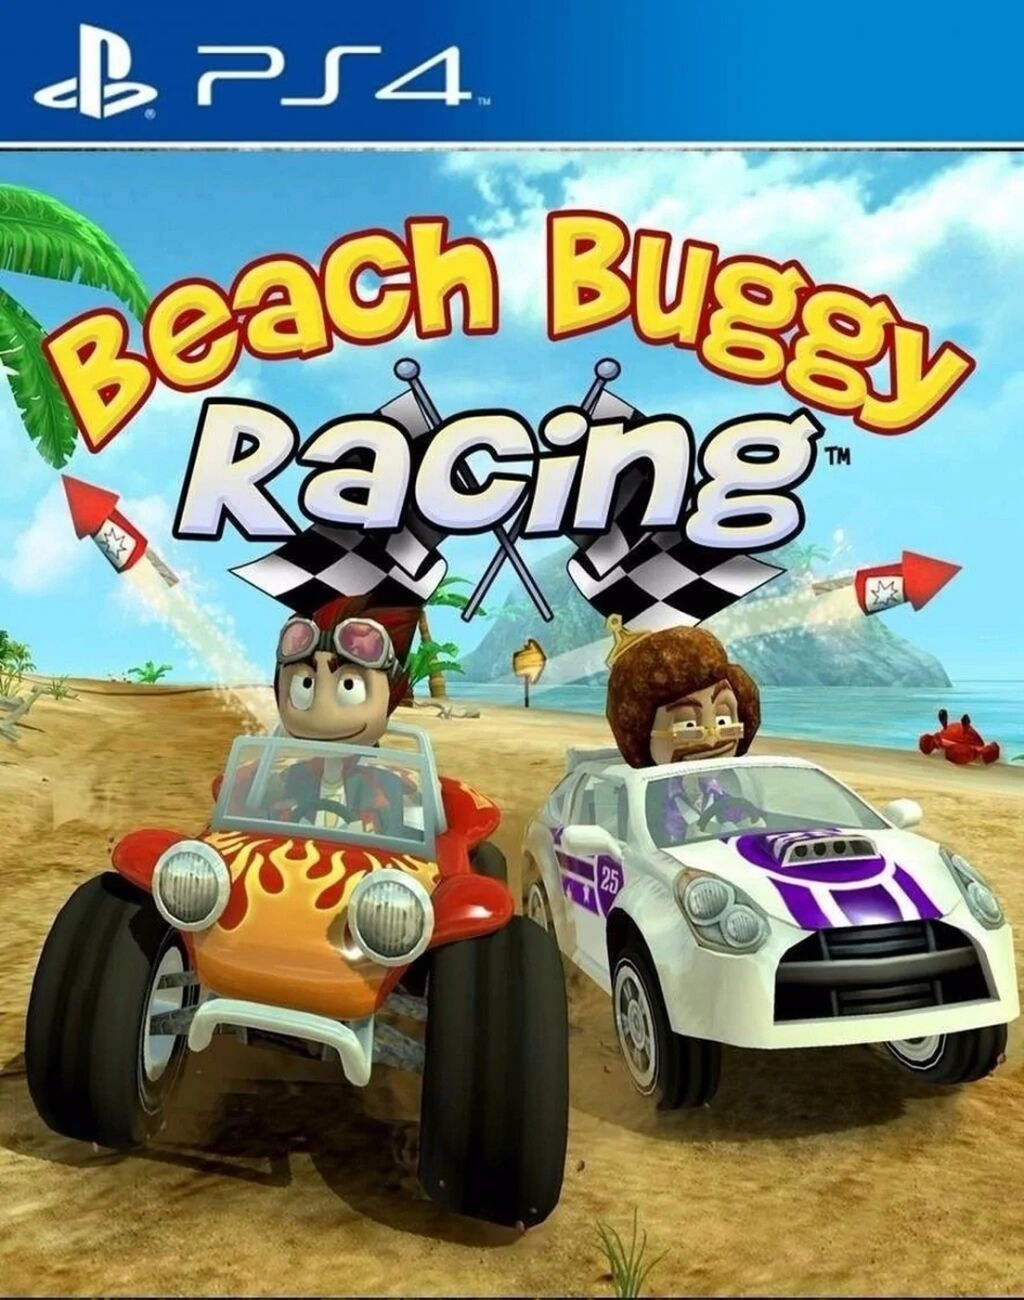 Beach Buggy Racing [PS4] 6.72 / 7.02 [EUR] (2015) [Русский] (v1.01)